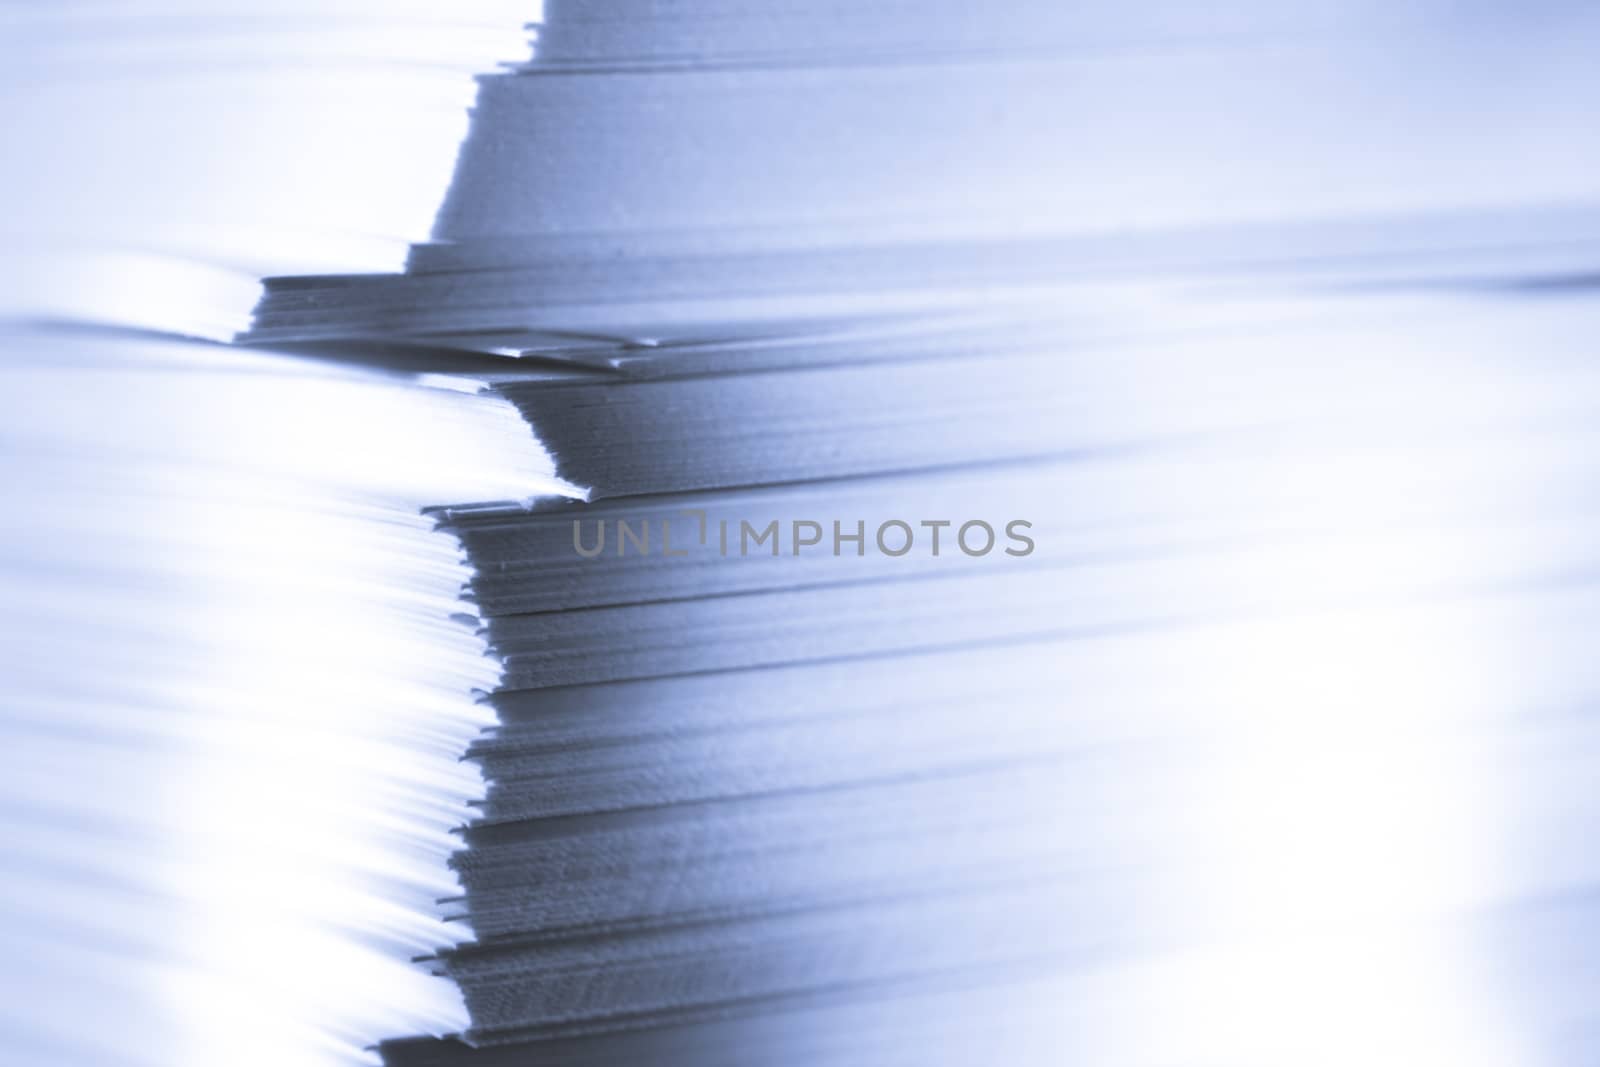 Stack of paper cards by Garsya